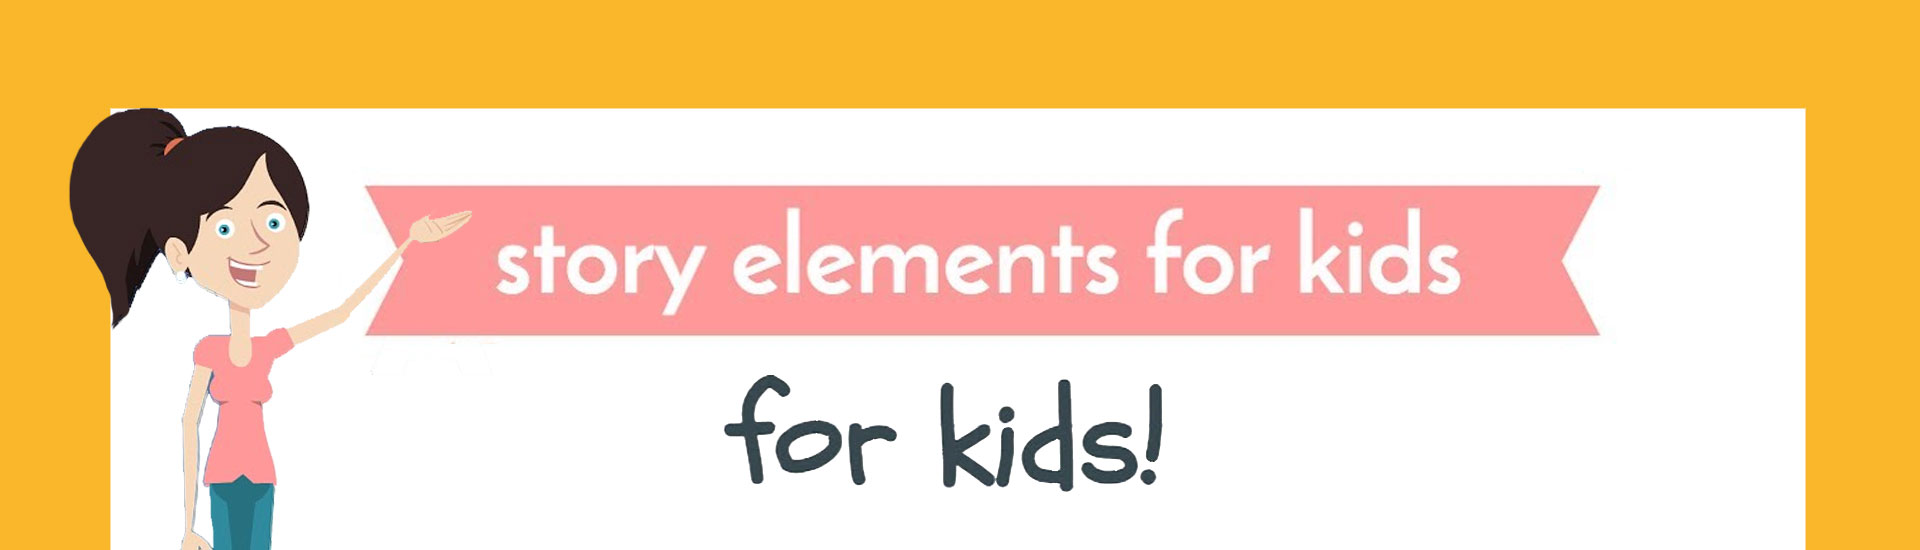 Story Elements for Kids